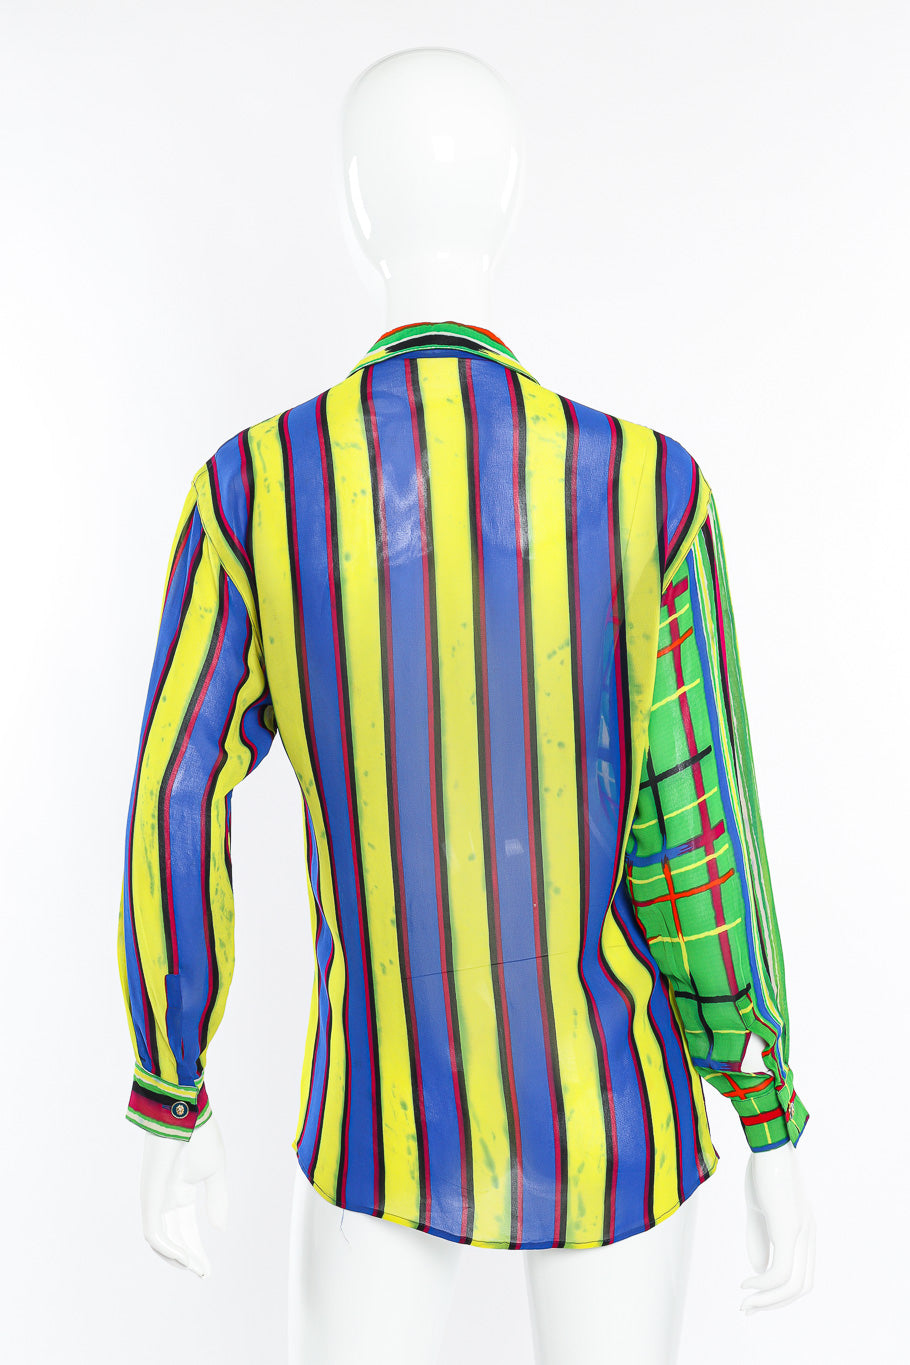 Vintage Versus Versace RYGB Long Sleeve Button Up back view on mannequin @Recessla